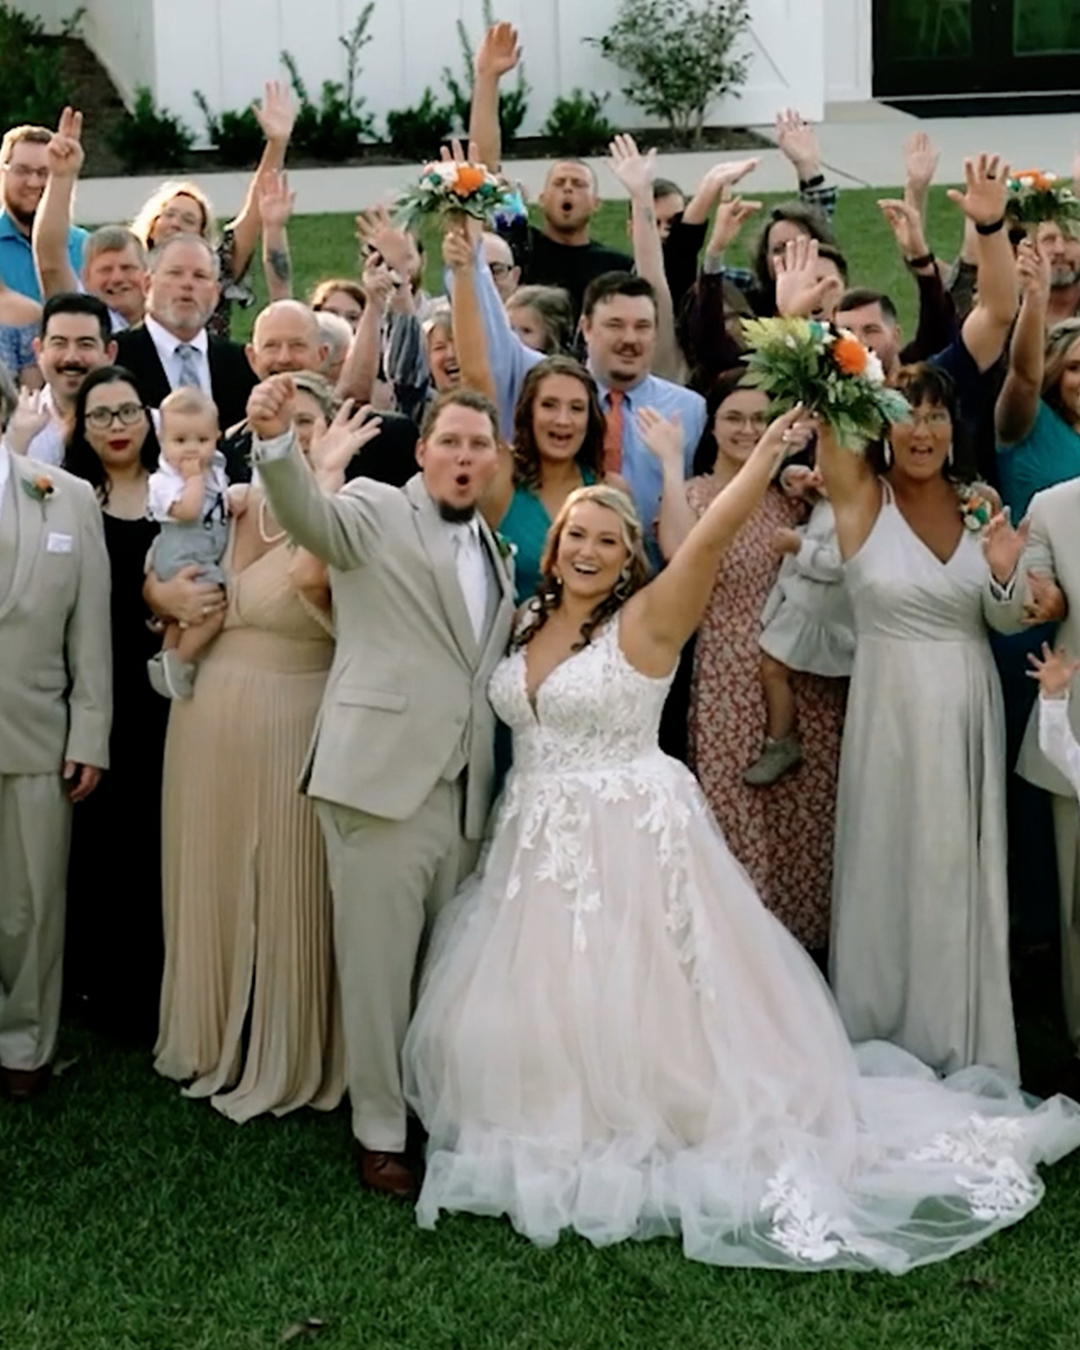 Tampa Wedding Videography - Capturing Your Big Day In A Beautiful way